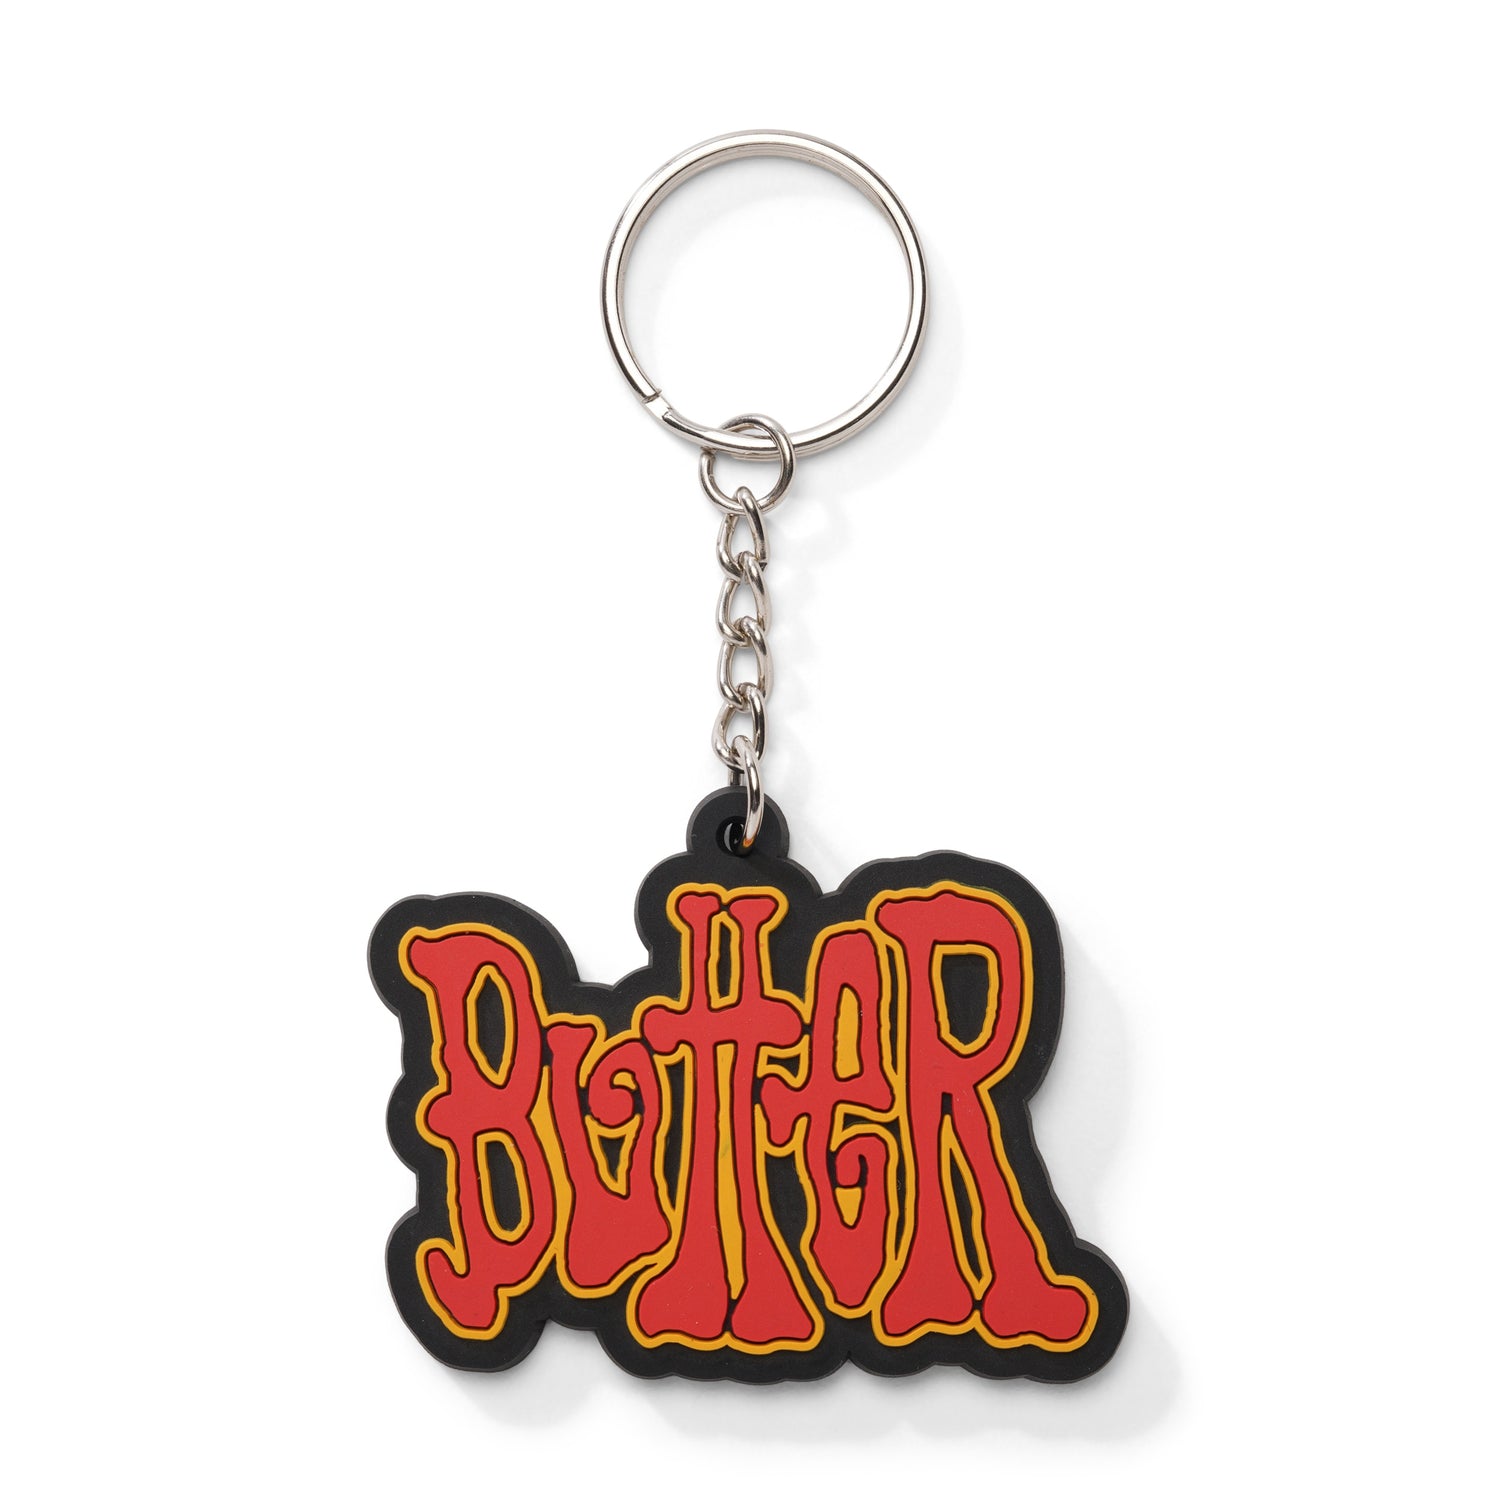 Tour Rubber Key Chain, Red / Yellow